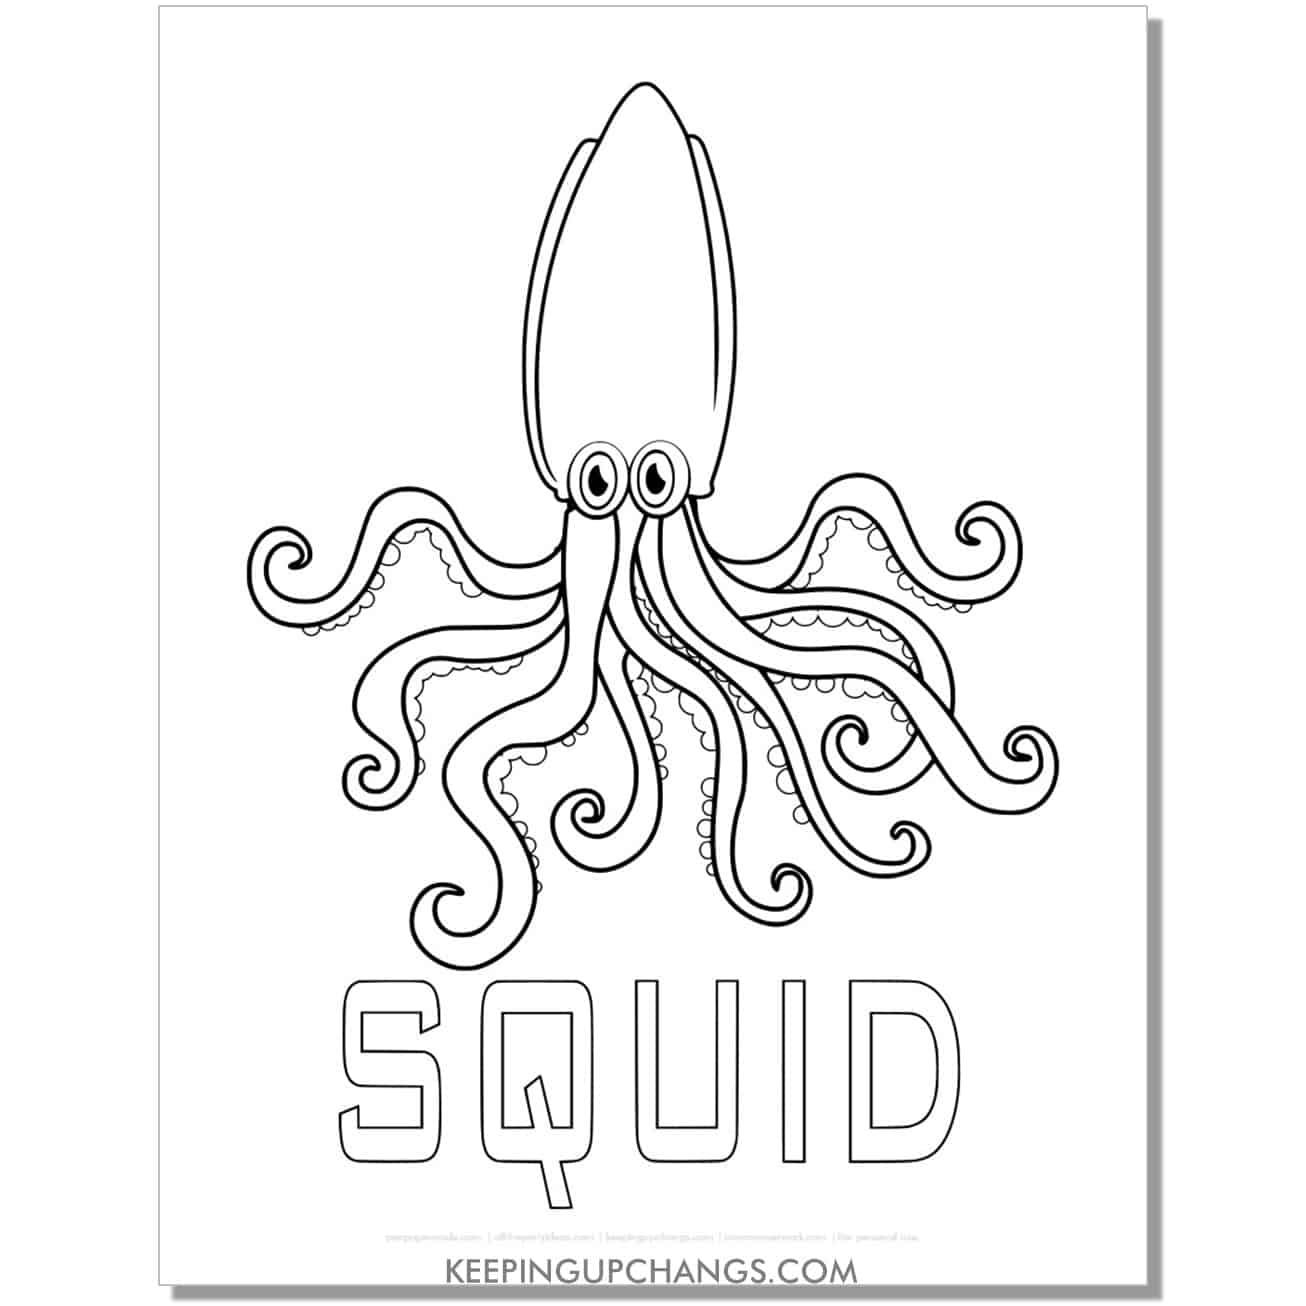 free hand drawn squid with word coloring page, sheet.